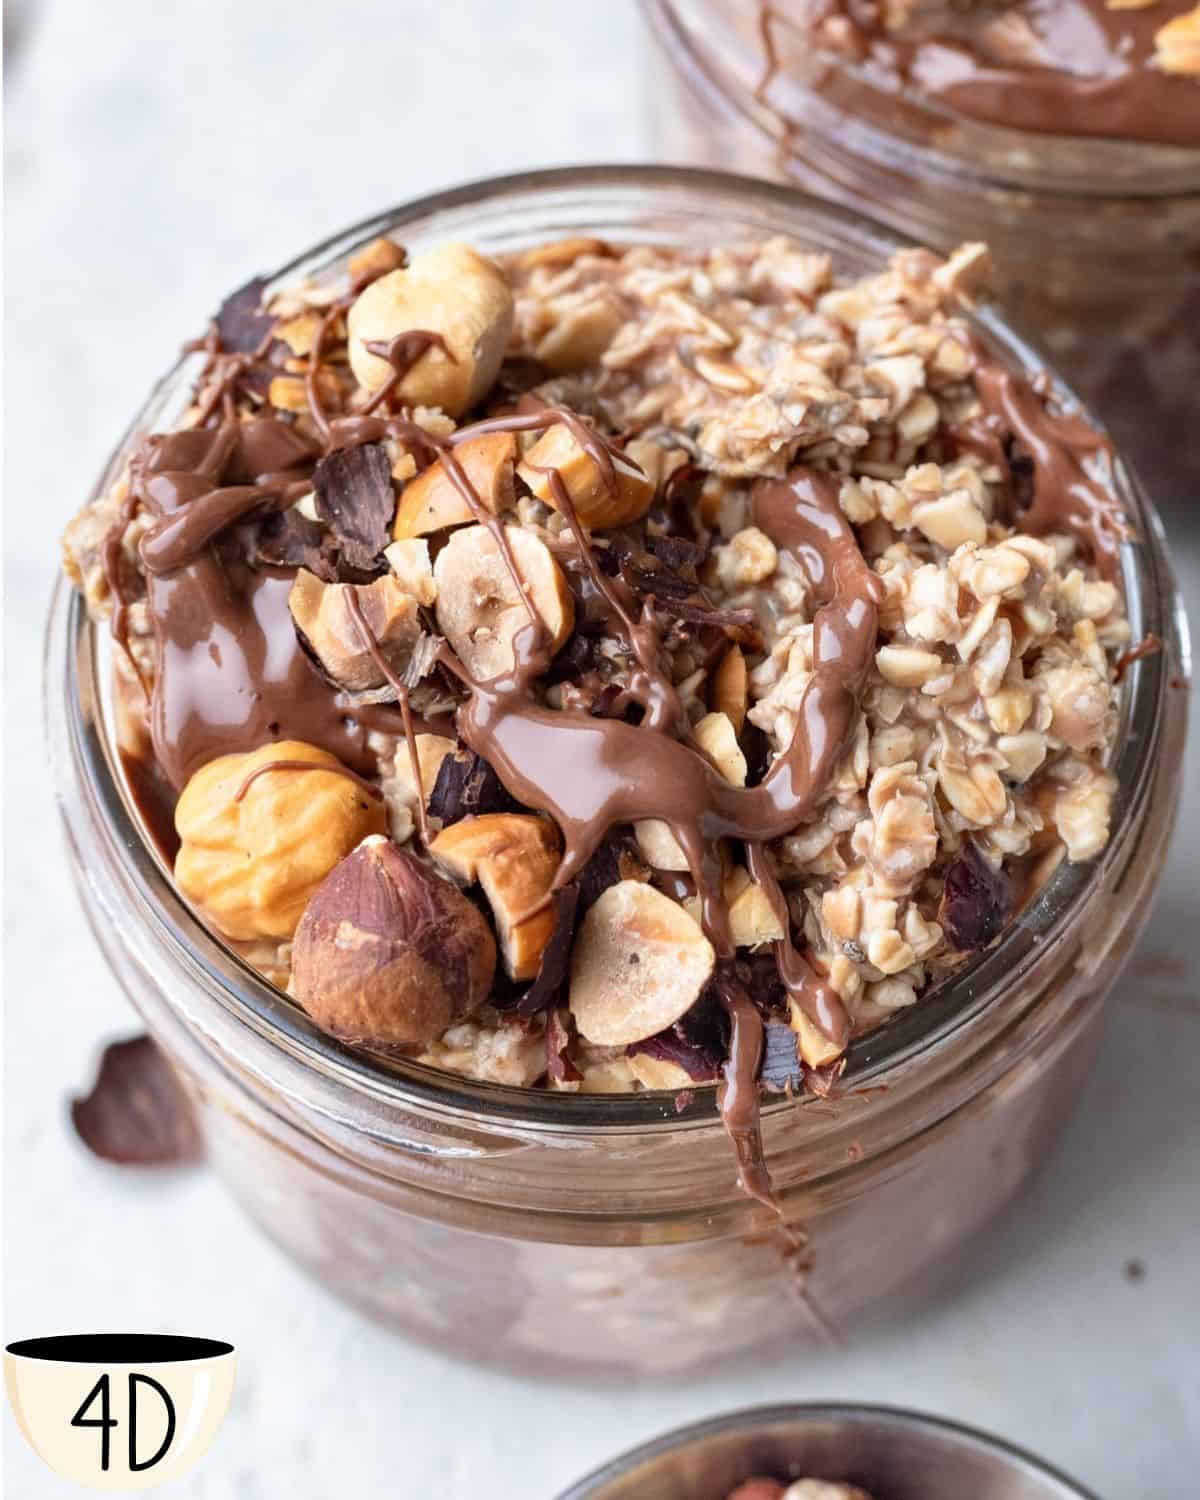 A jar of overnight oats with Nutella, generously topped with whole hazelnuts, banana slices, and a drizzle of chocolate.